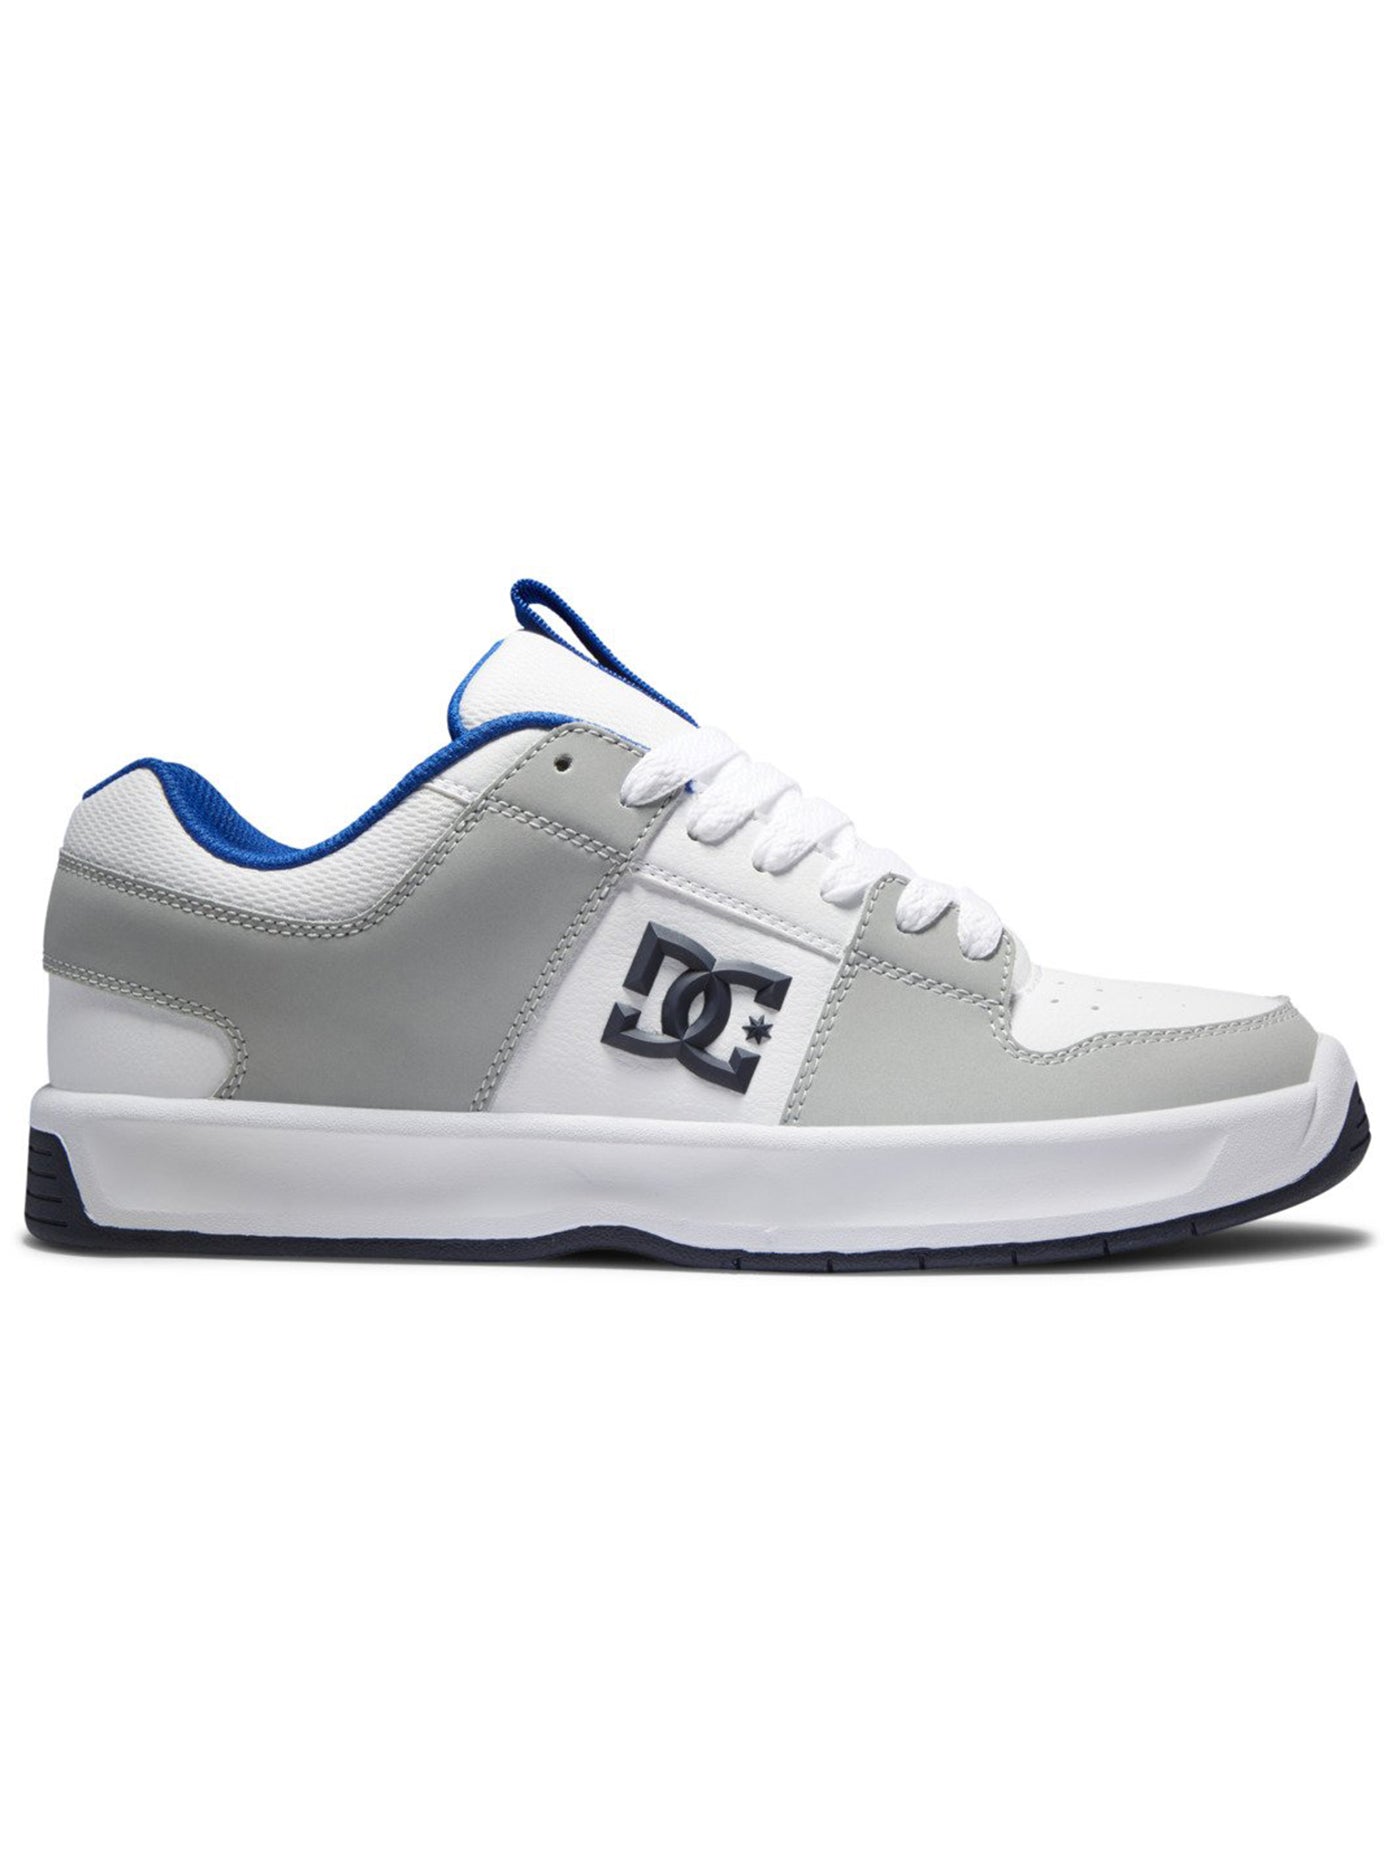 what stores sell dc shoes